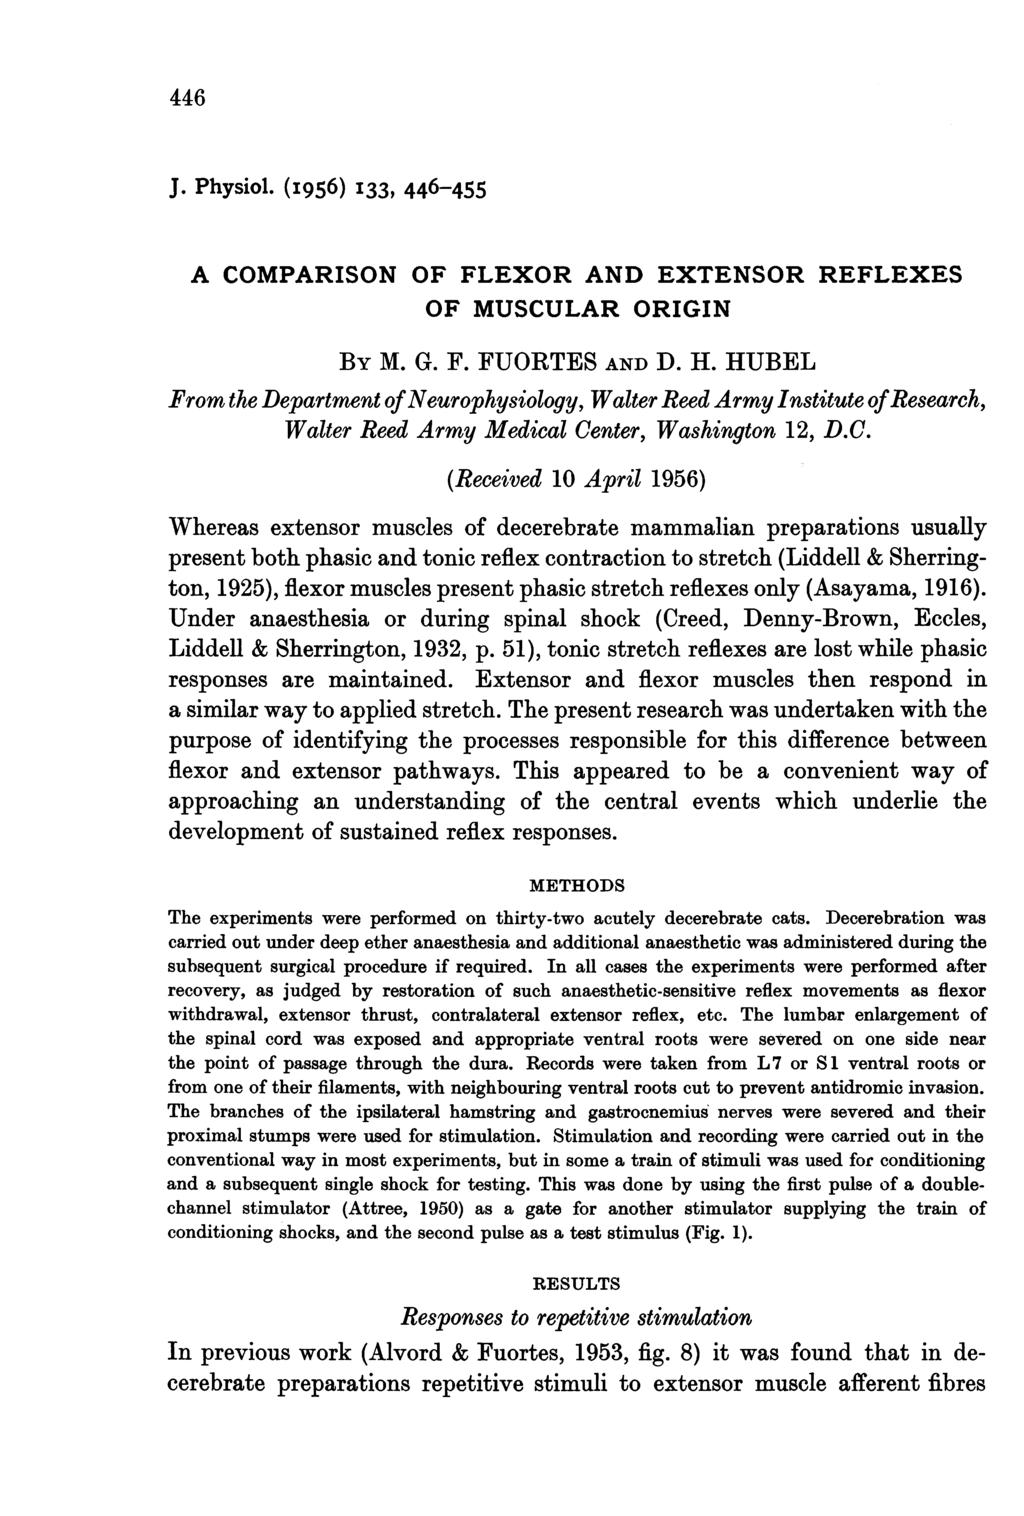 446 J. Physiol. (I956) I33, 446-455 A COMPARISON OF FLEXOR AND EXTENSOR REFLEXES OF MUSCULAR ORIGIN BY M. G. F. FUORTES AND D. H.